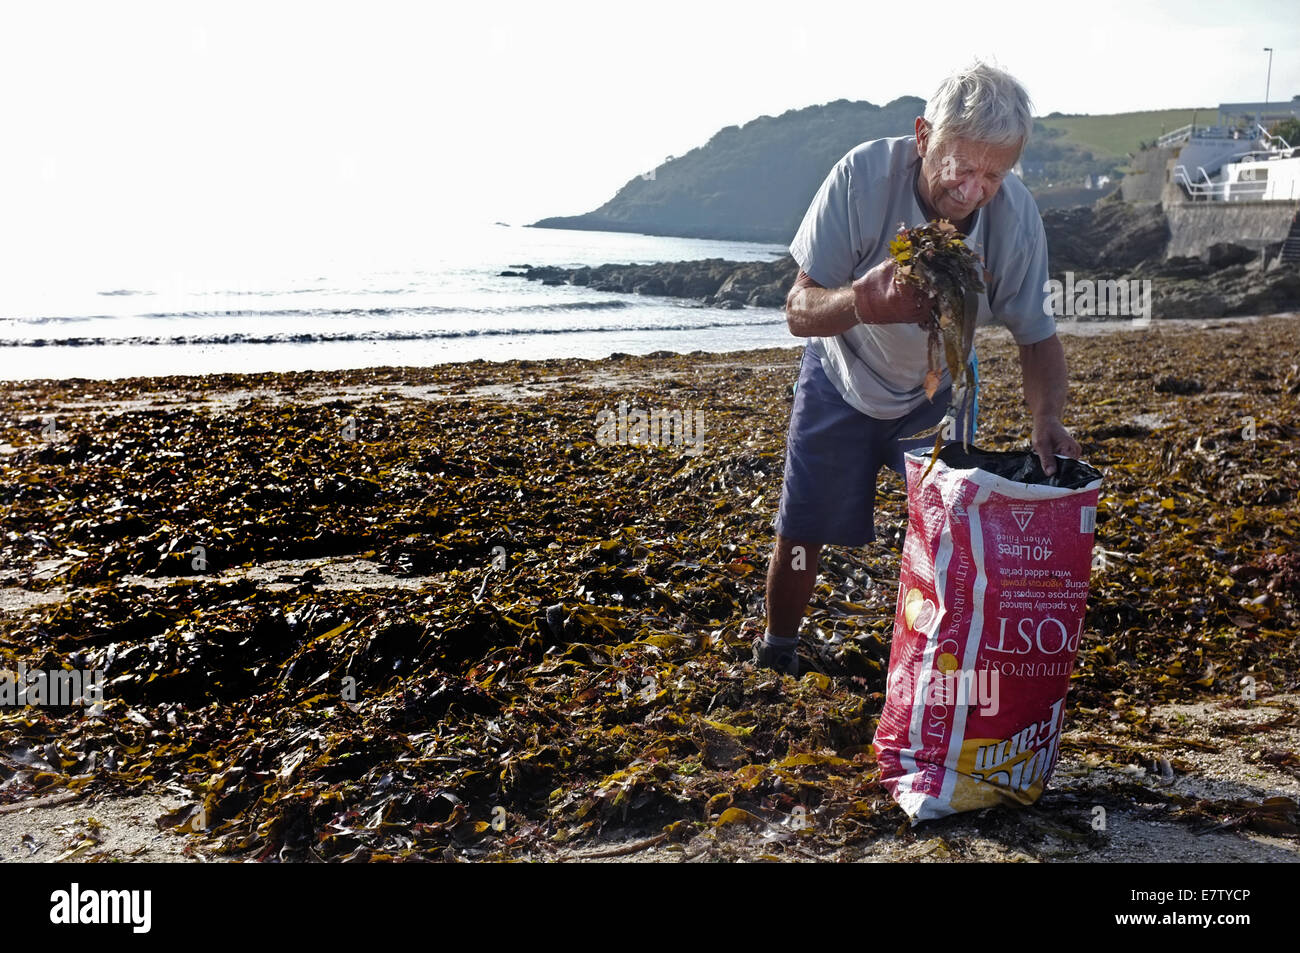 A man collecting seaweed to use as a manure and soil improver in his garden Stock Photo